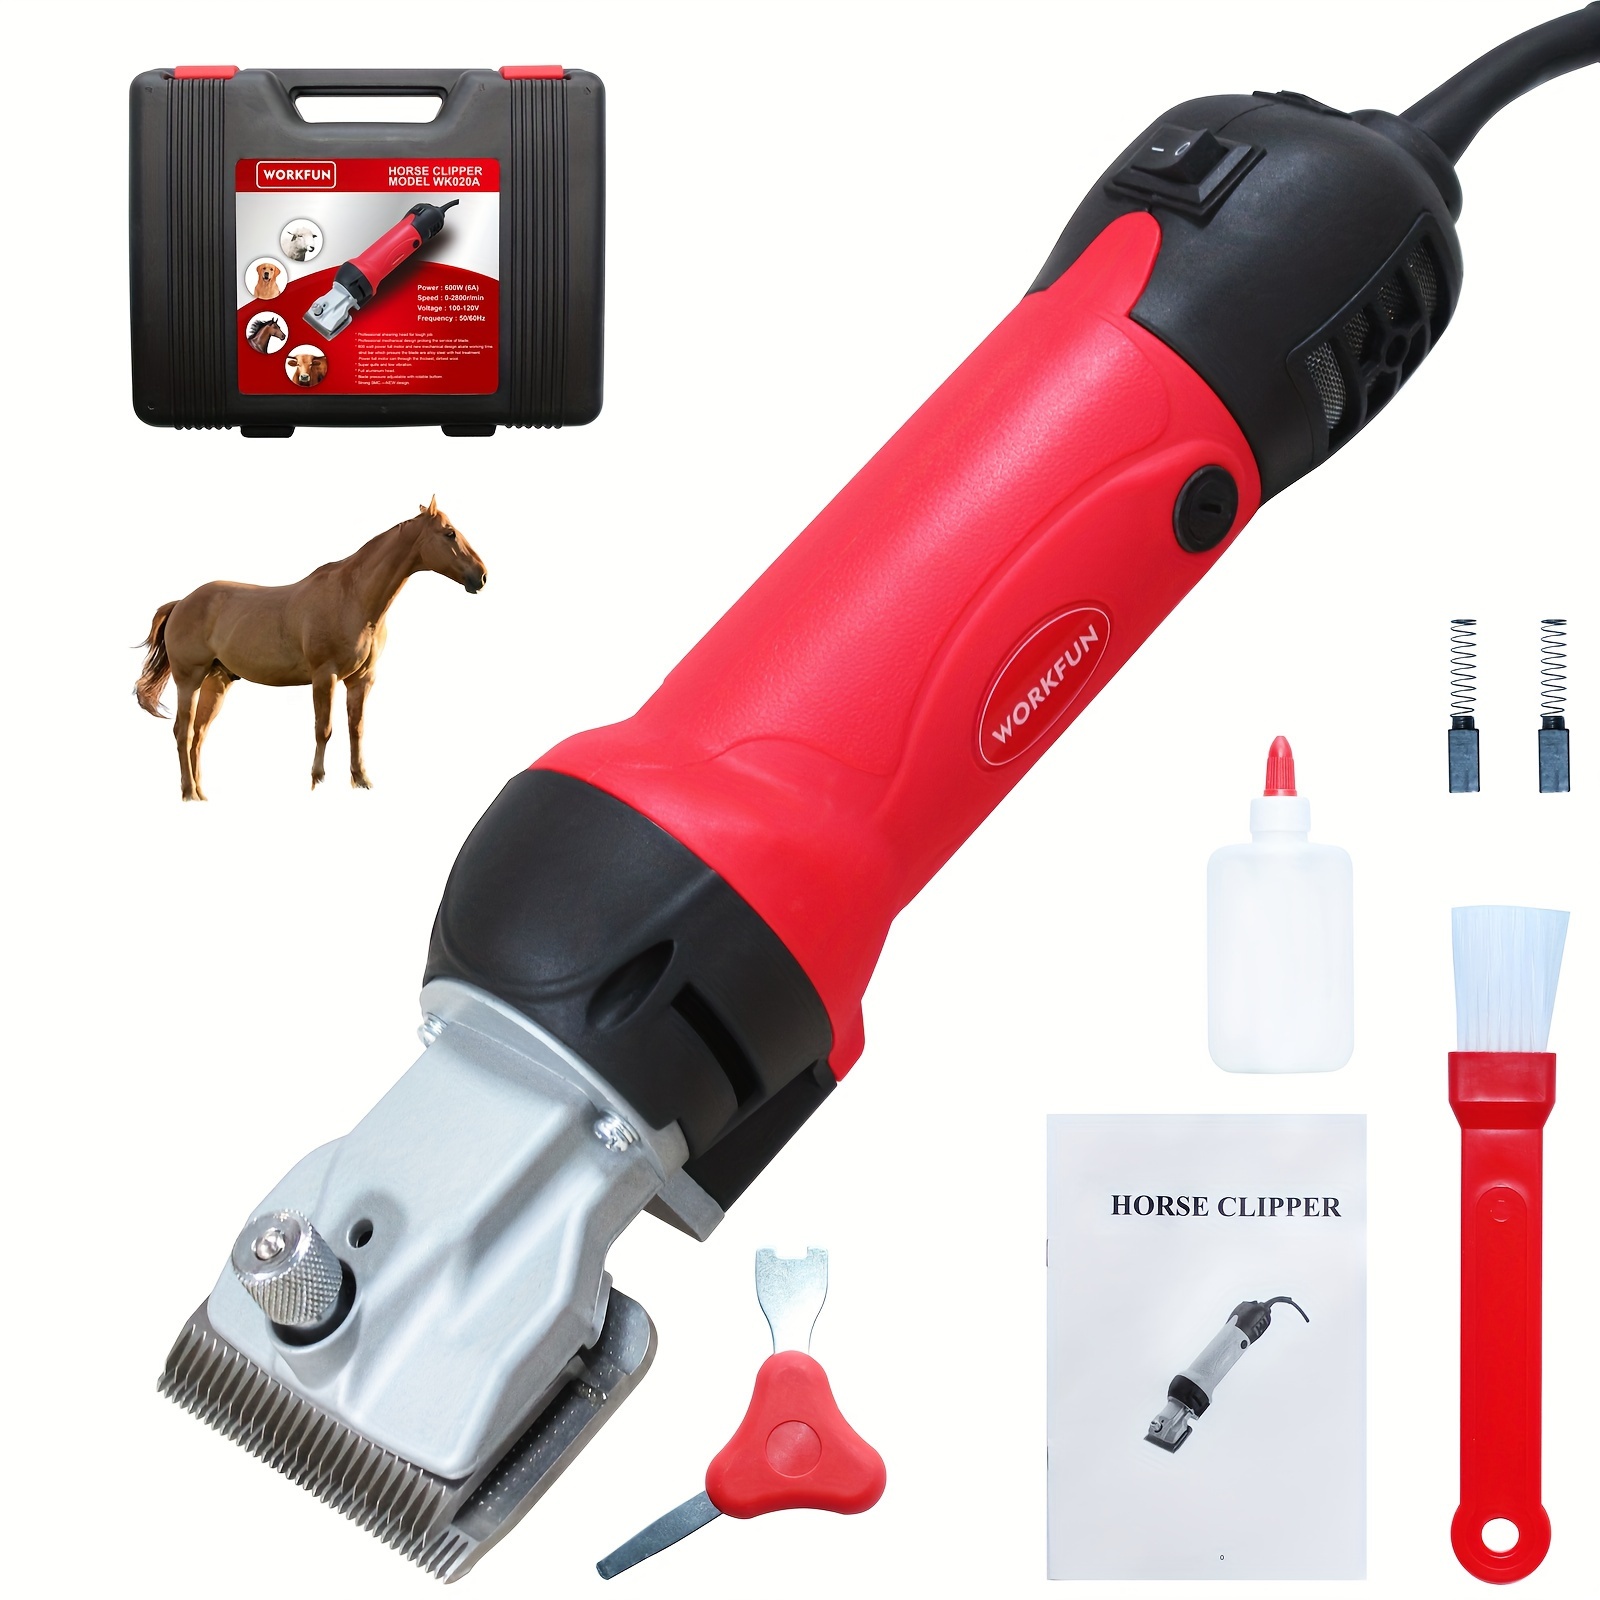  Horses Clippers,500w Professional Horse Grooming Kit, Pet Farm  Supplies for Shaving Fur Wool in Horse, Cattle, Dog, Farm Livestock Pet  Grooming : Pet Supplies